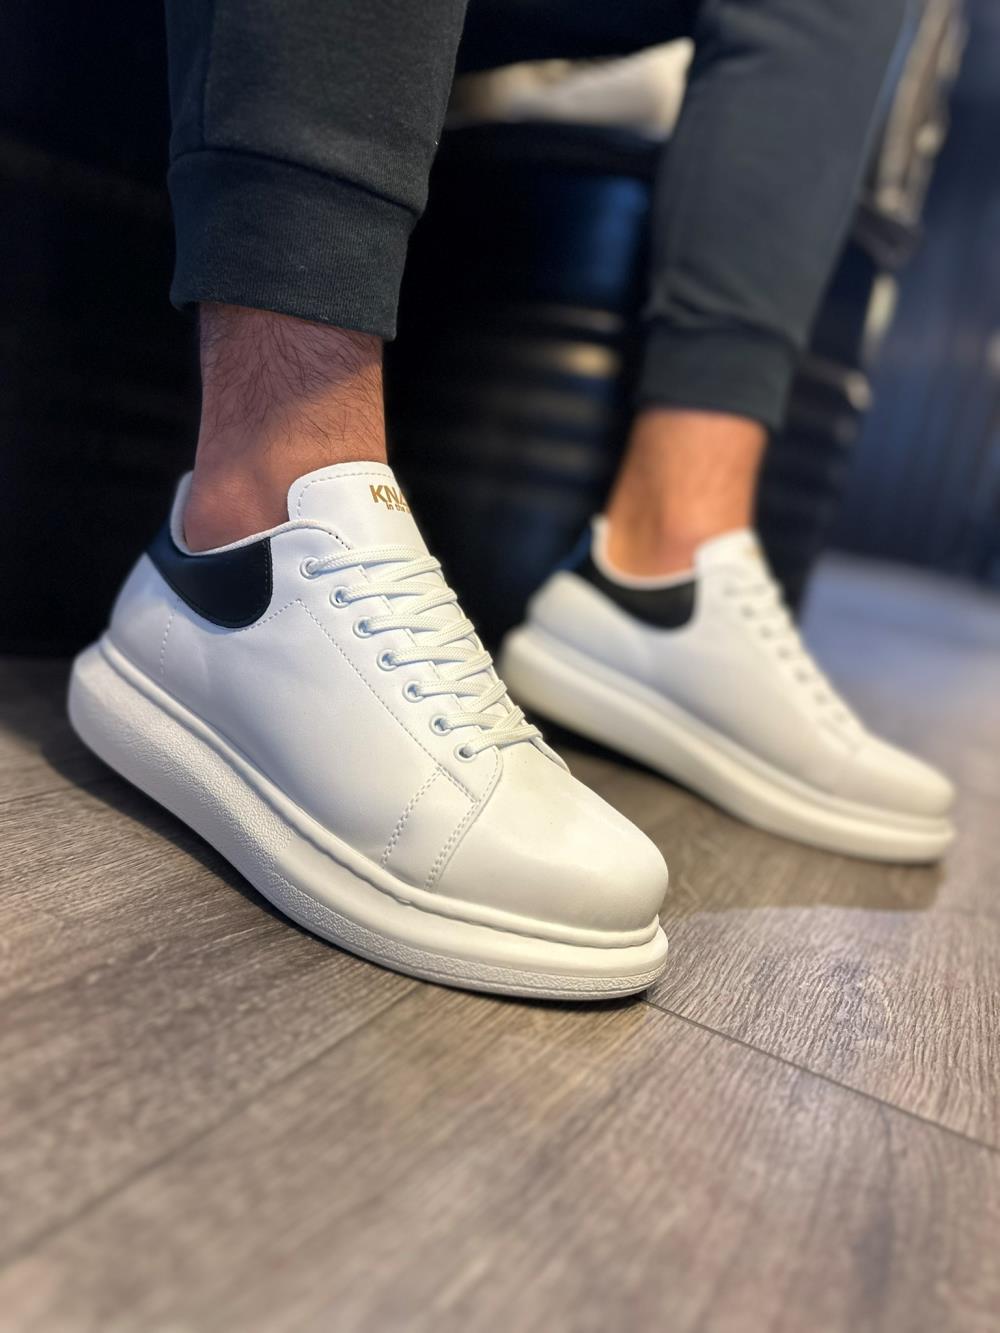 Men's White High Sole Casual Sneaker Sports Shoes - STREETMODE ™